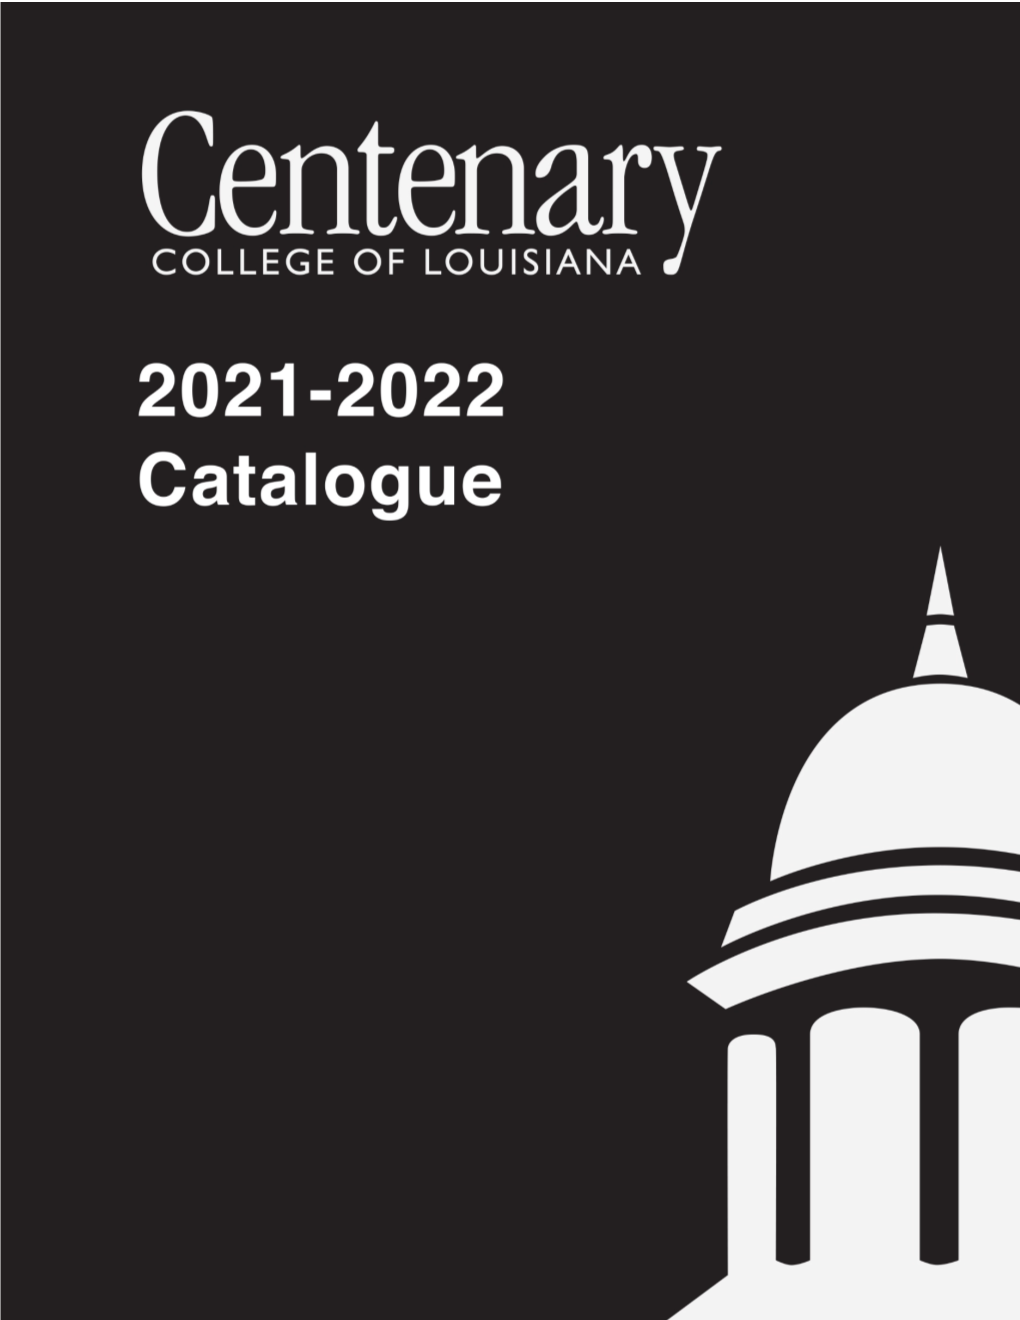 View the 2021-2022 Course Catalogue